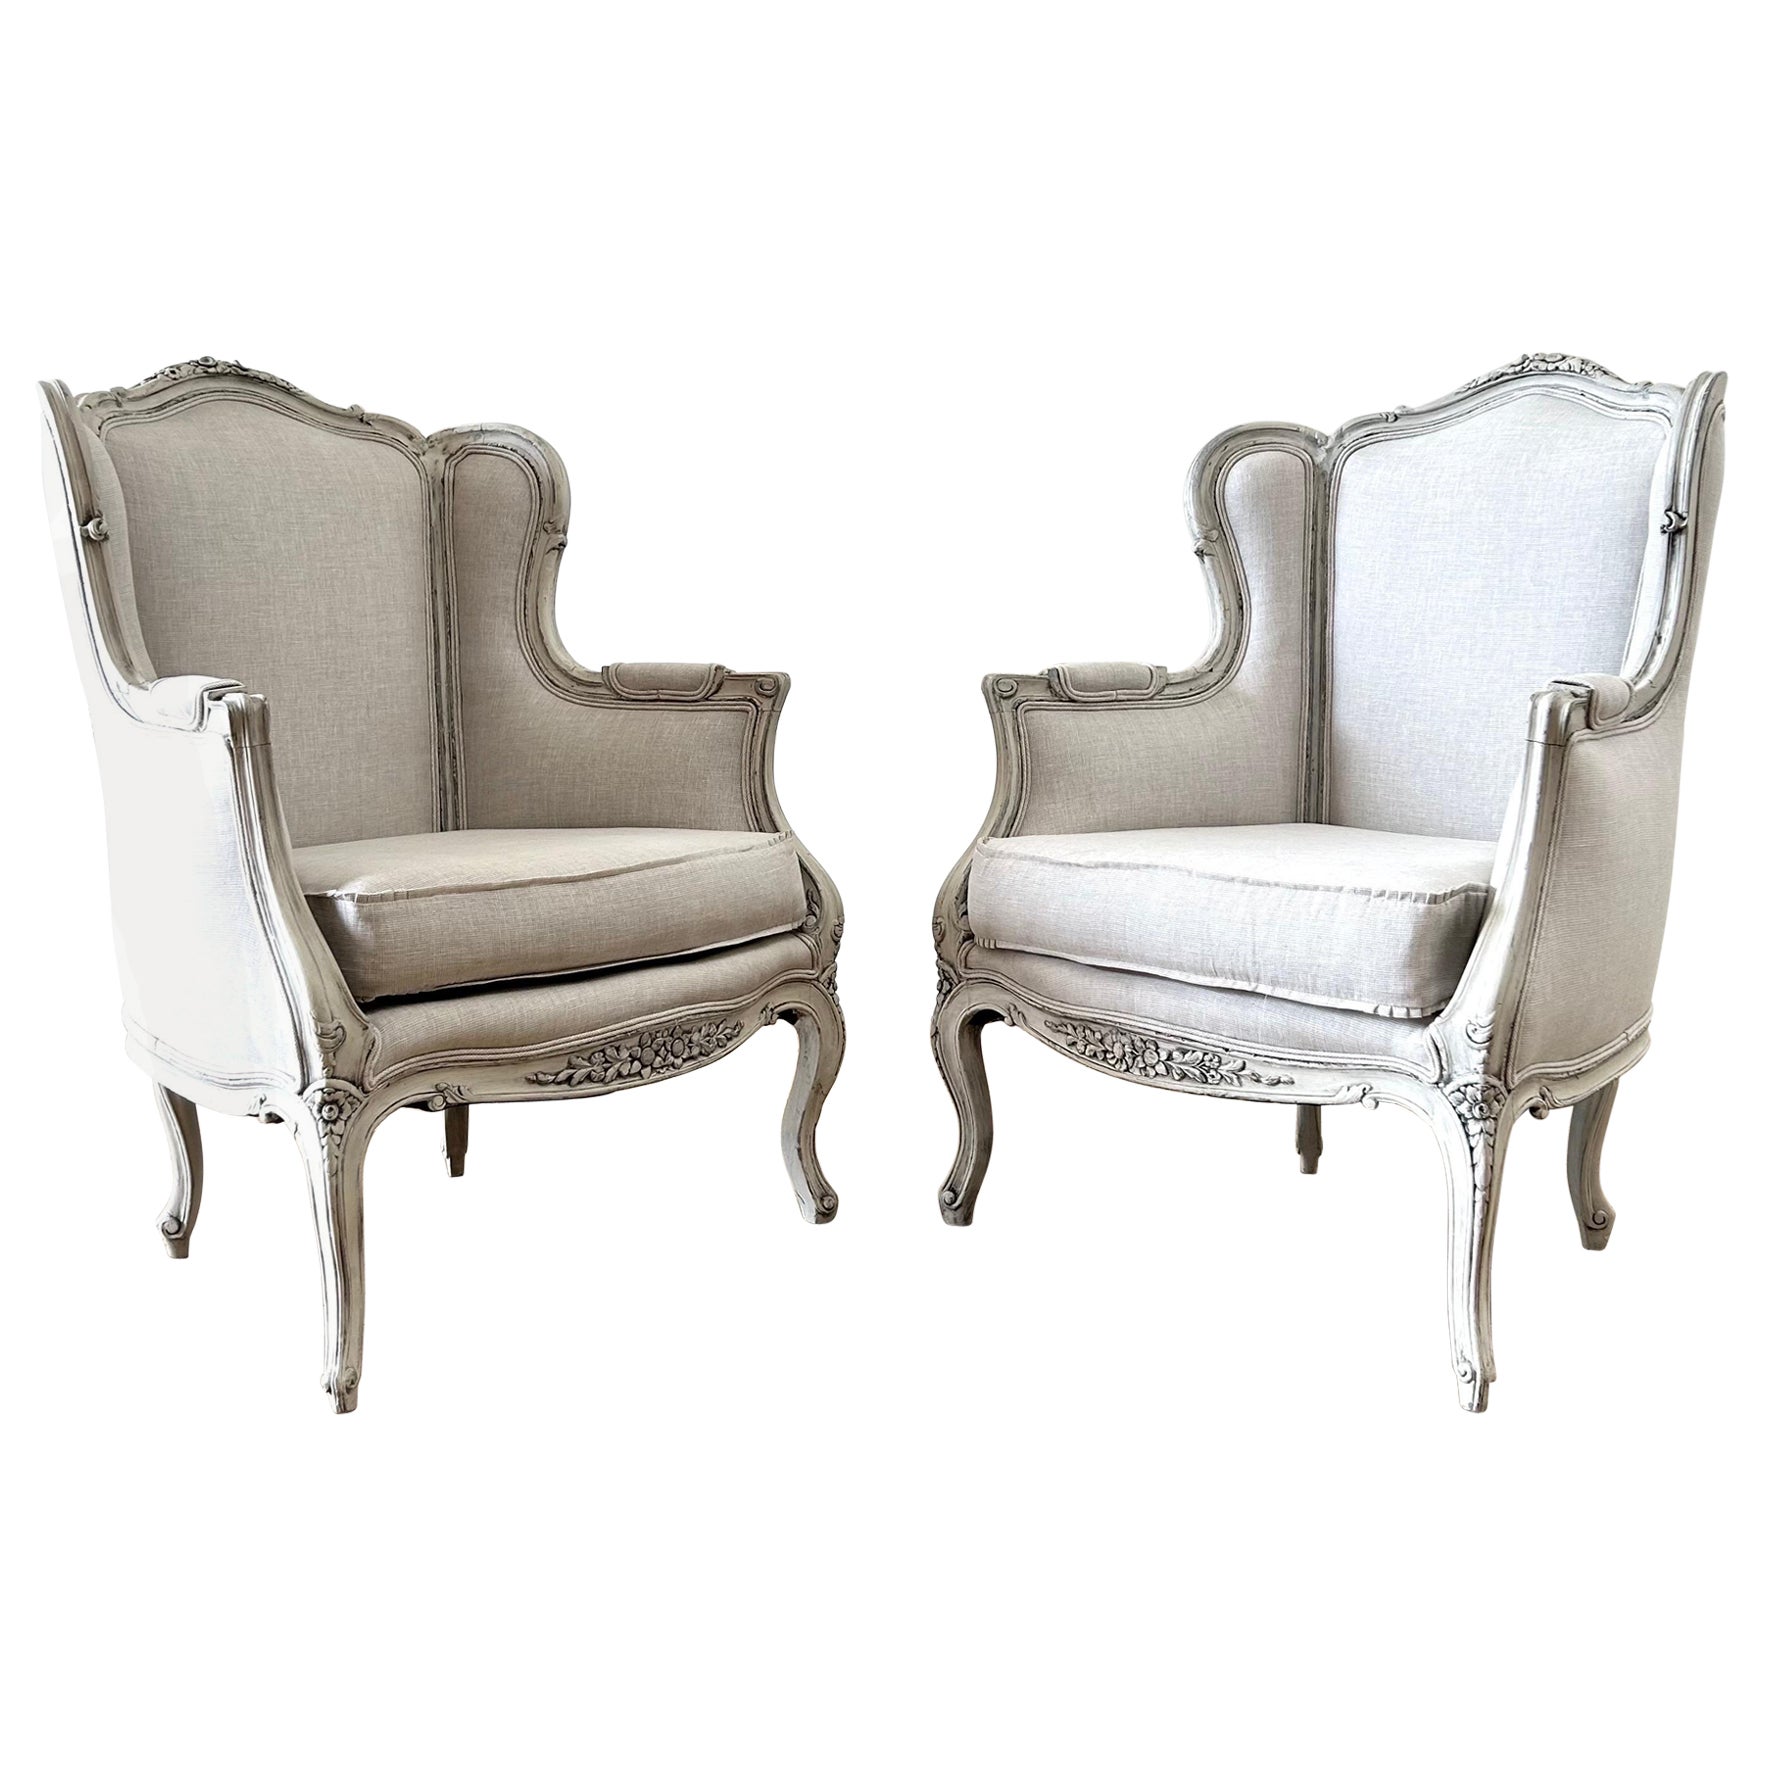 Pair of Vintage Painted and Linen Upholstered wingback Chairs